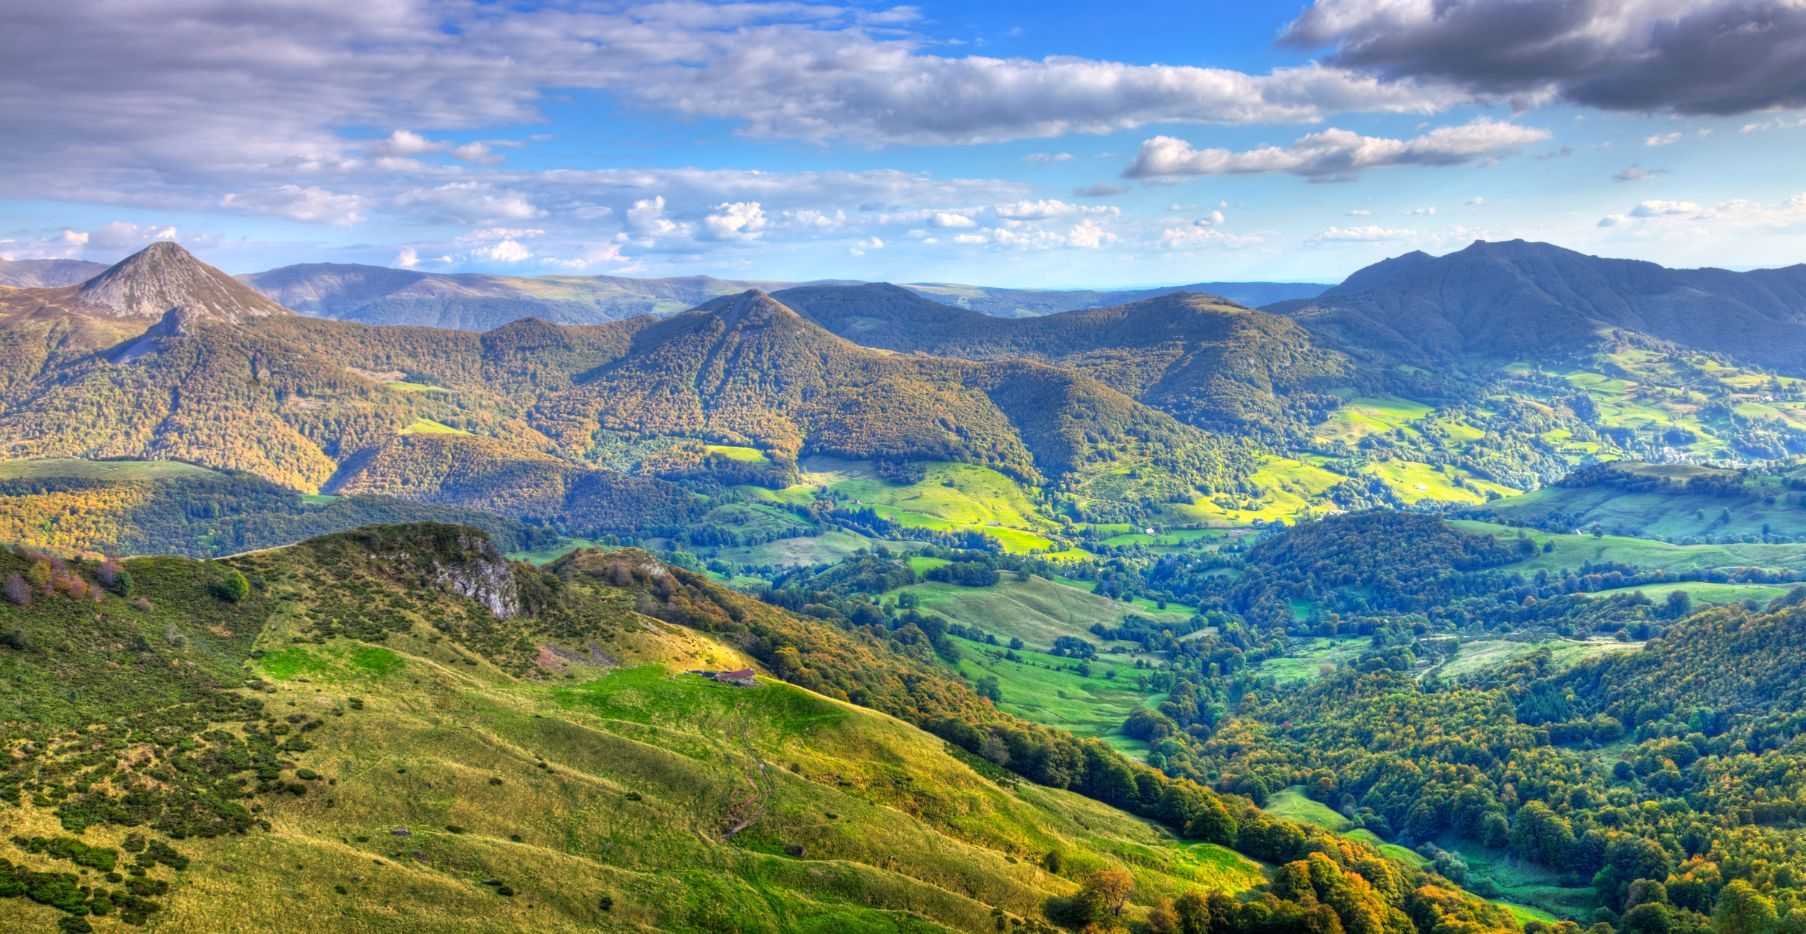 Beautiful panorama of the peaks, plateaus and valleys in Auvergne in The Central Massif